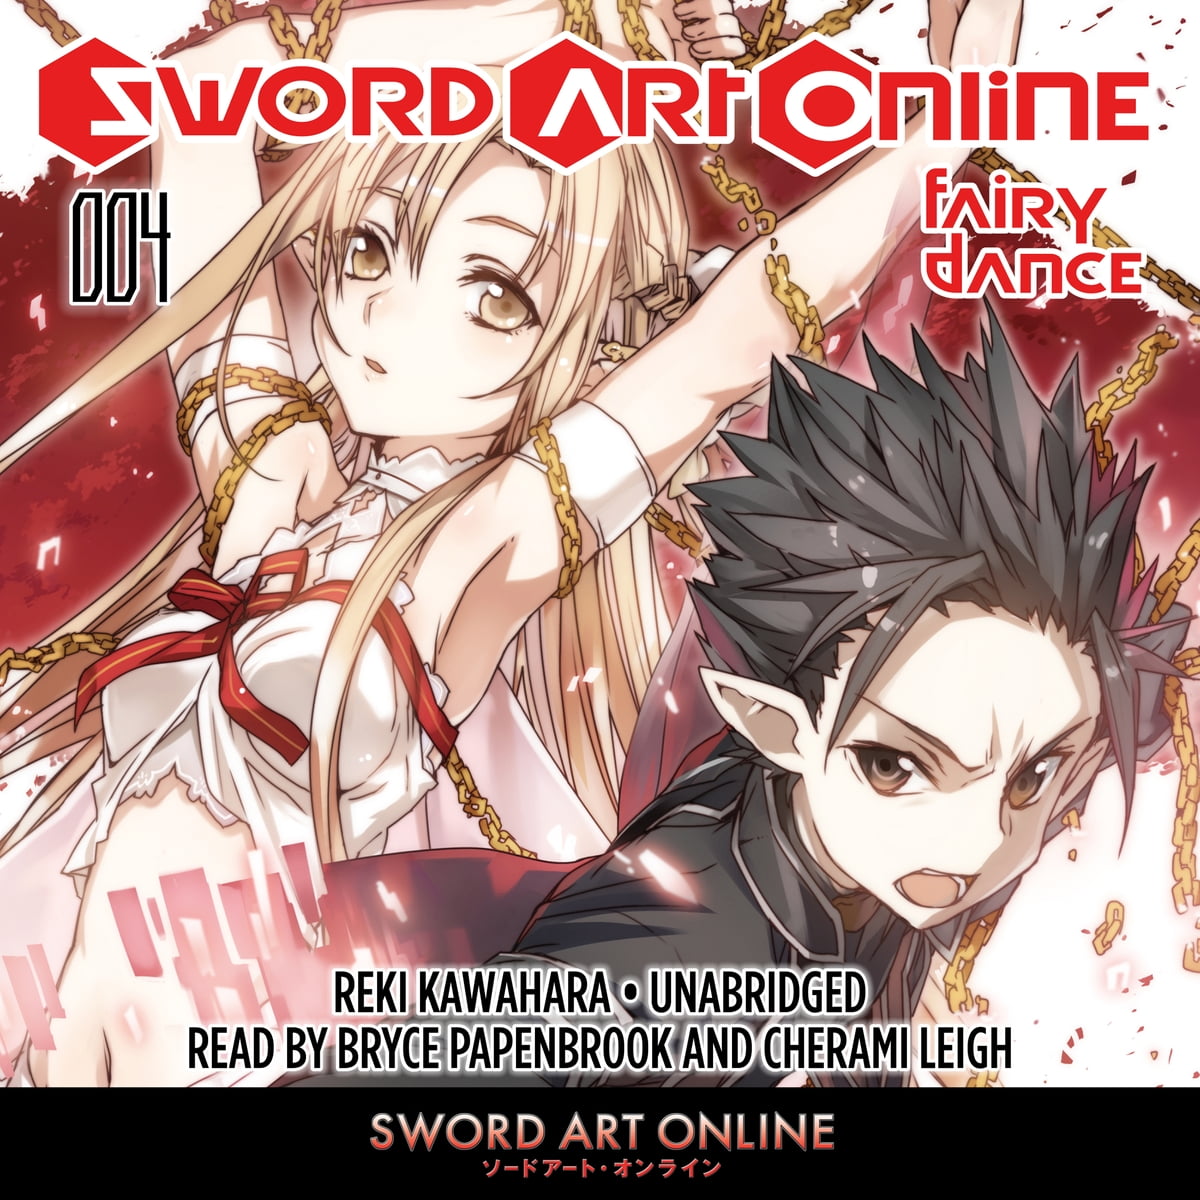 86EIGHTYSIX Volume 3 light novel by Asato Asato  OverDrive ebooks  audiobooks and more for libraries and schools